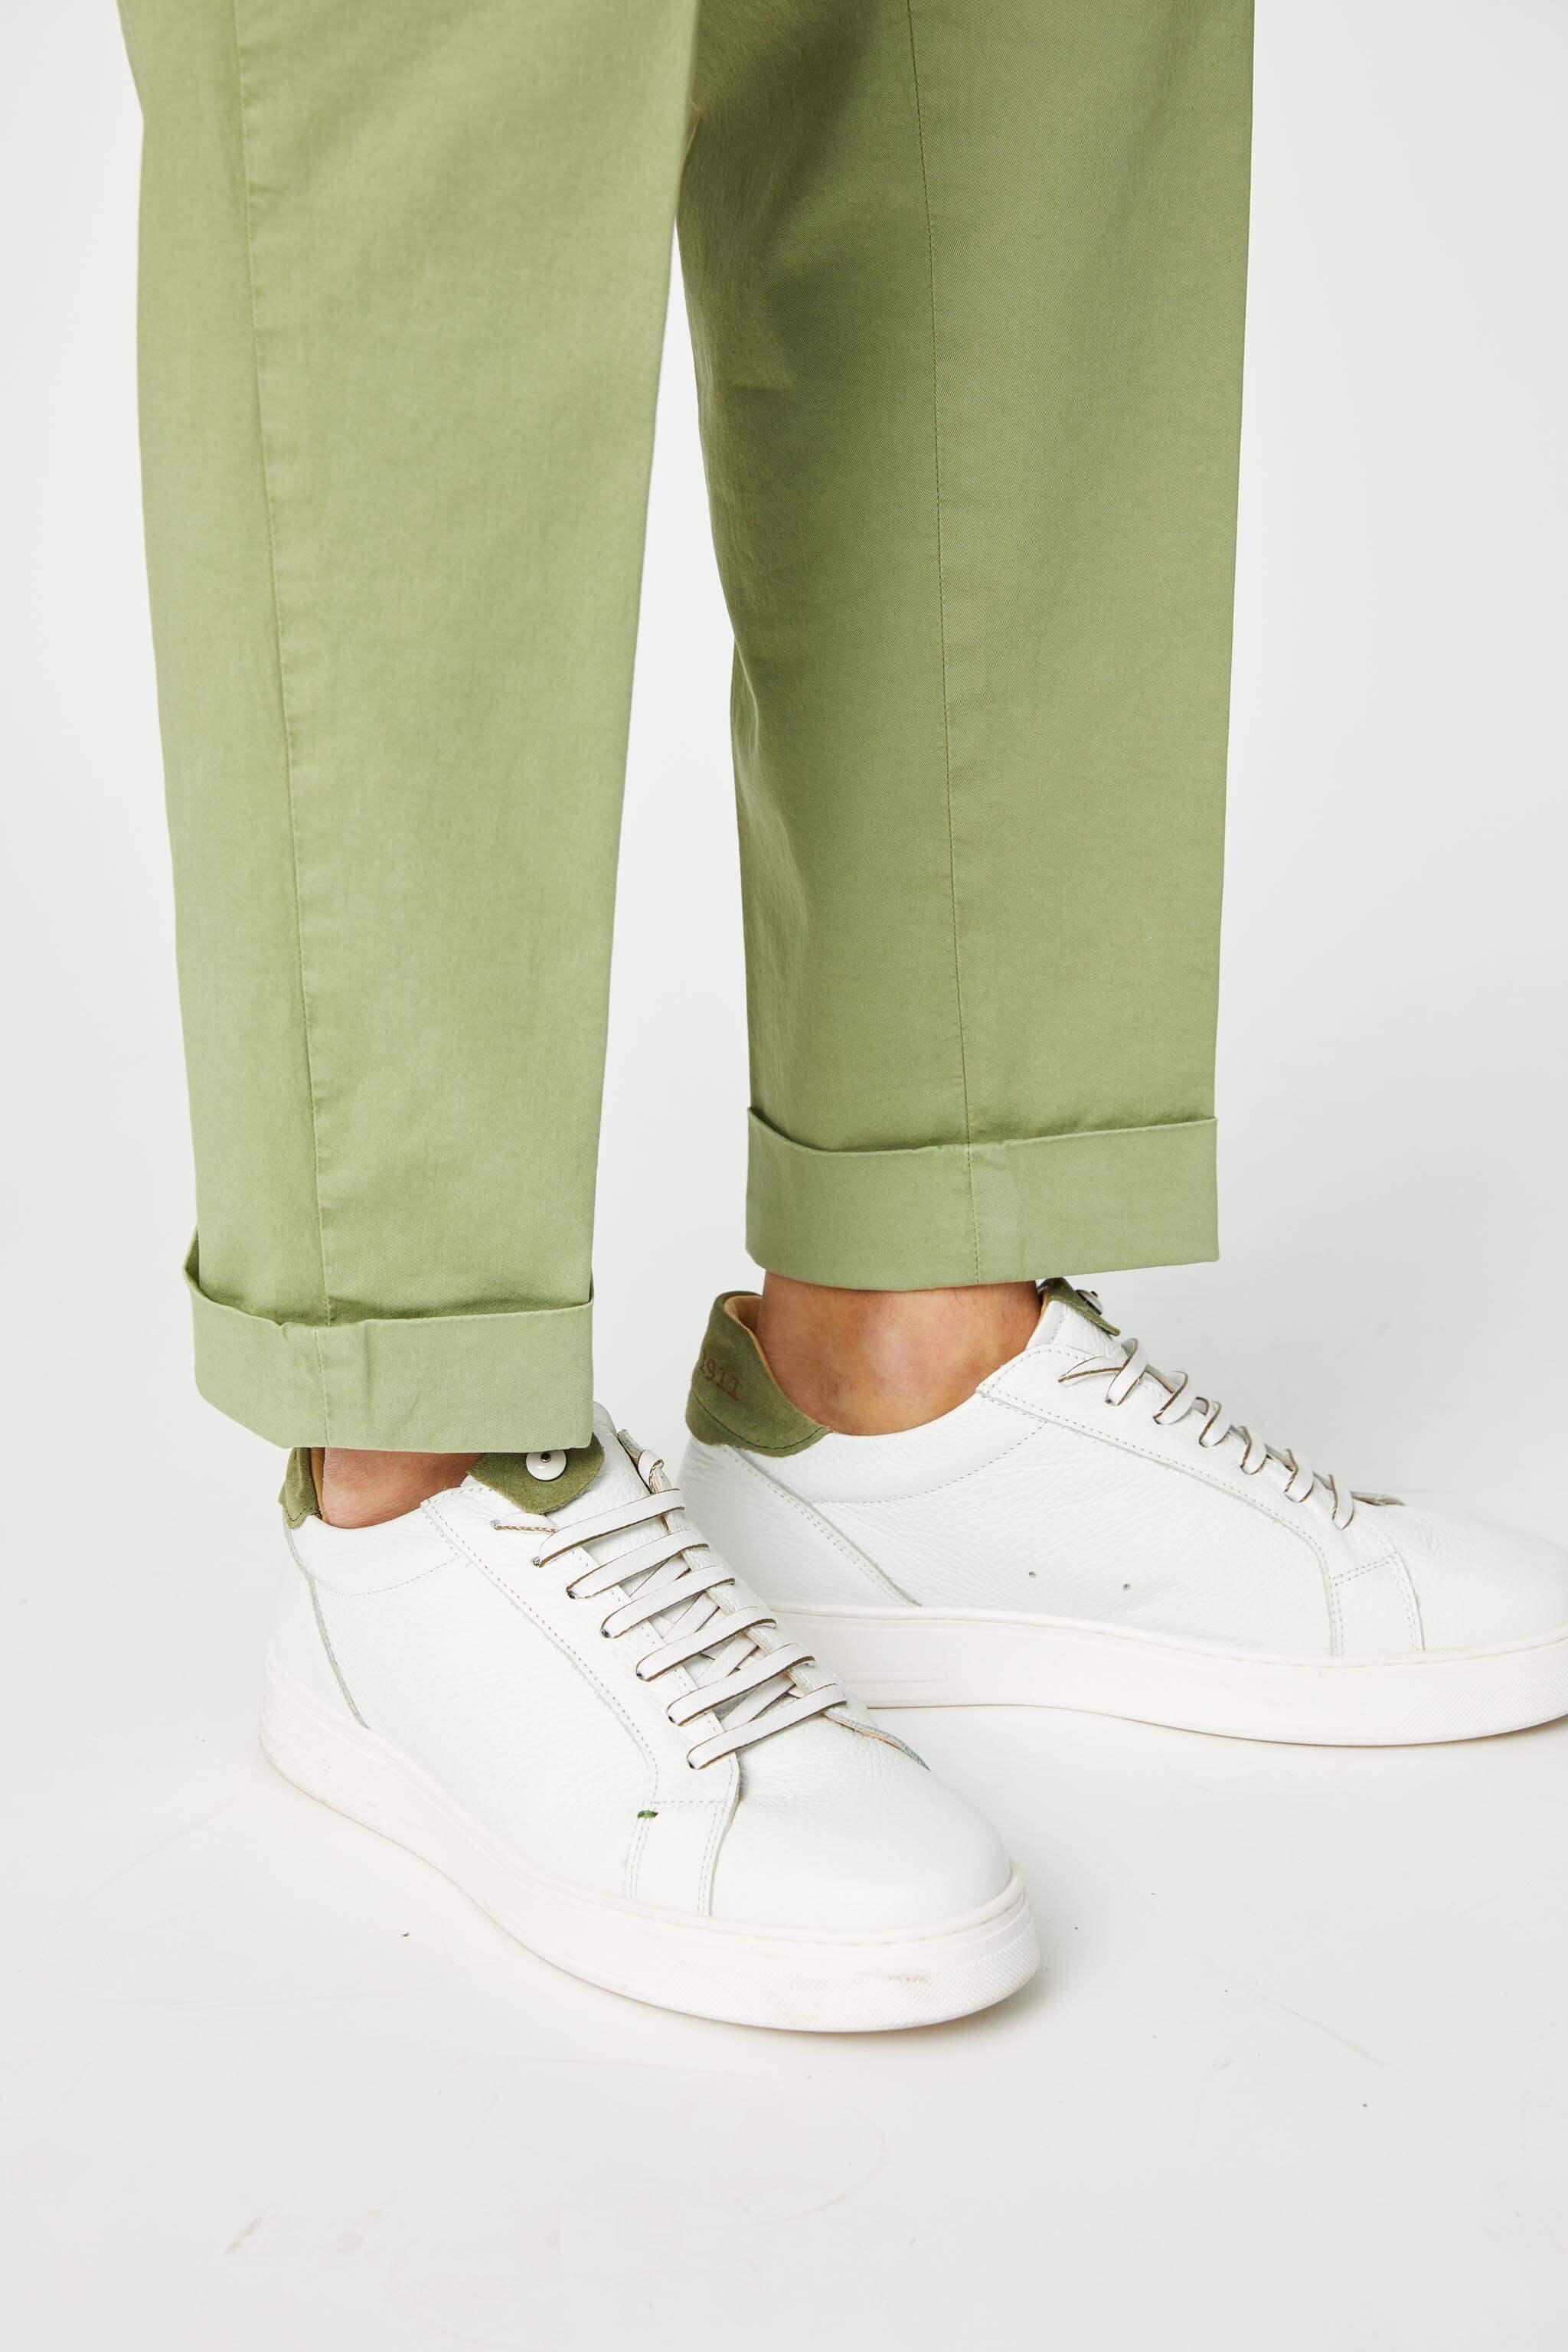 Garment-dyed MILES pants in green